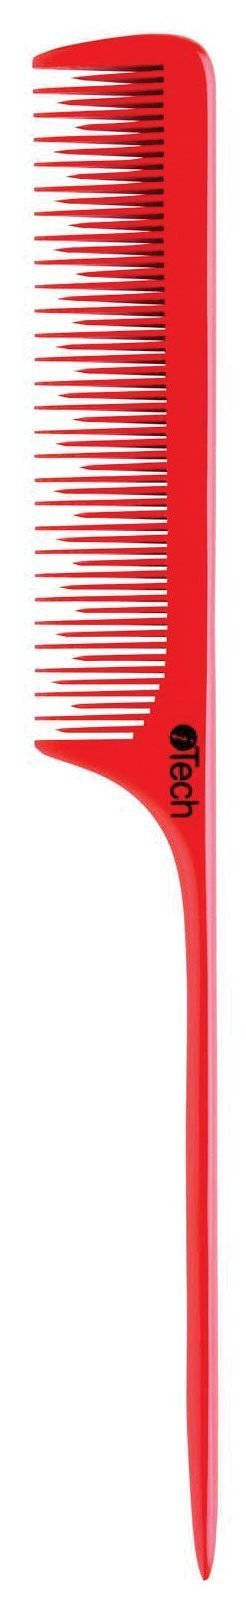 Teasing Comb - iTech Collection HairArt Int'l Inc.